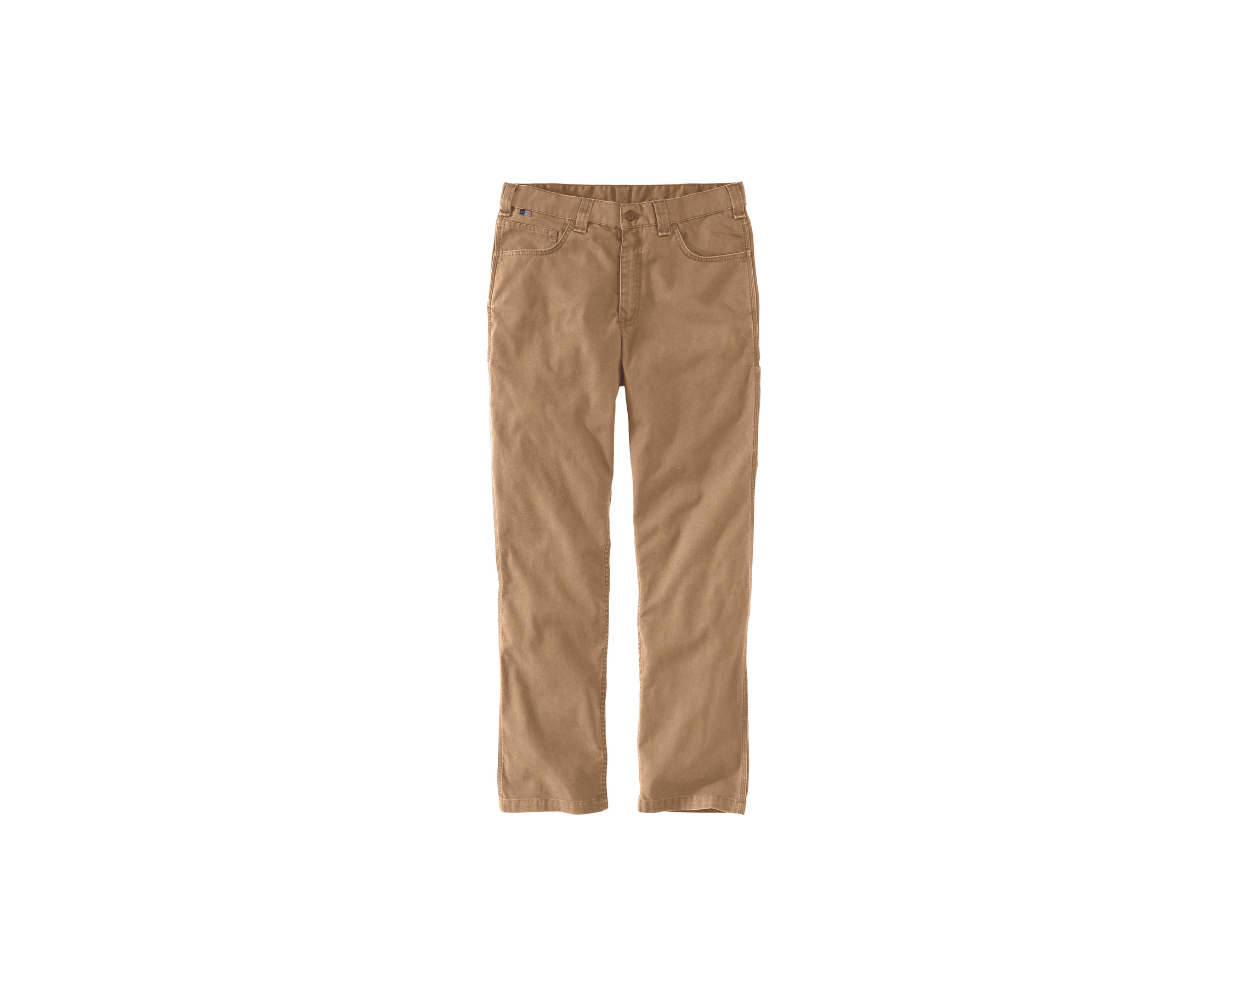 Flame-Resistant Midweight Canvas Pant-Loose Fit